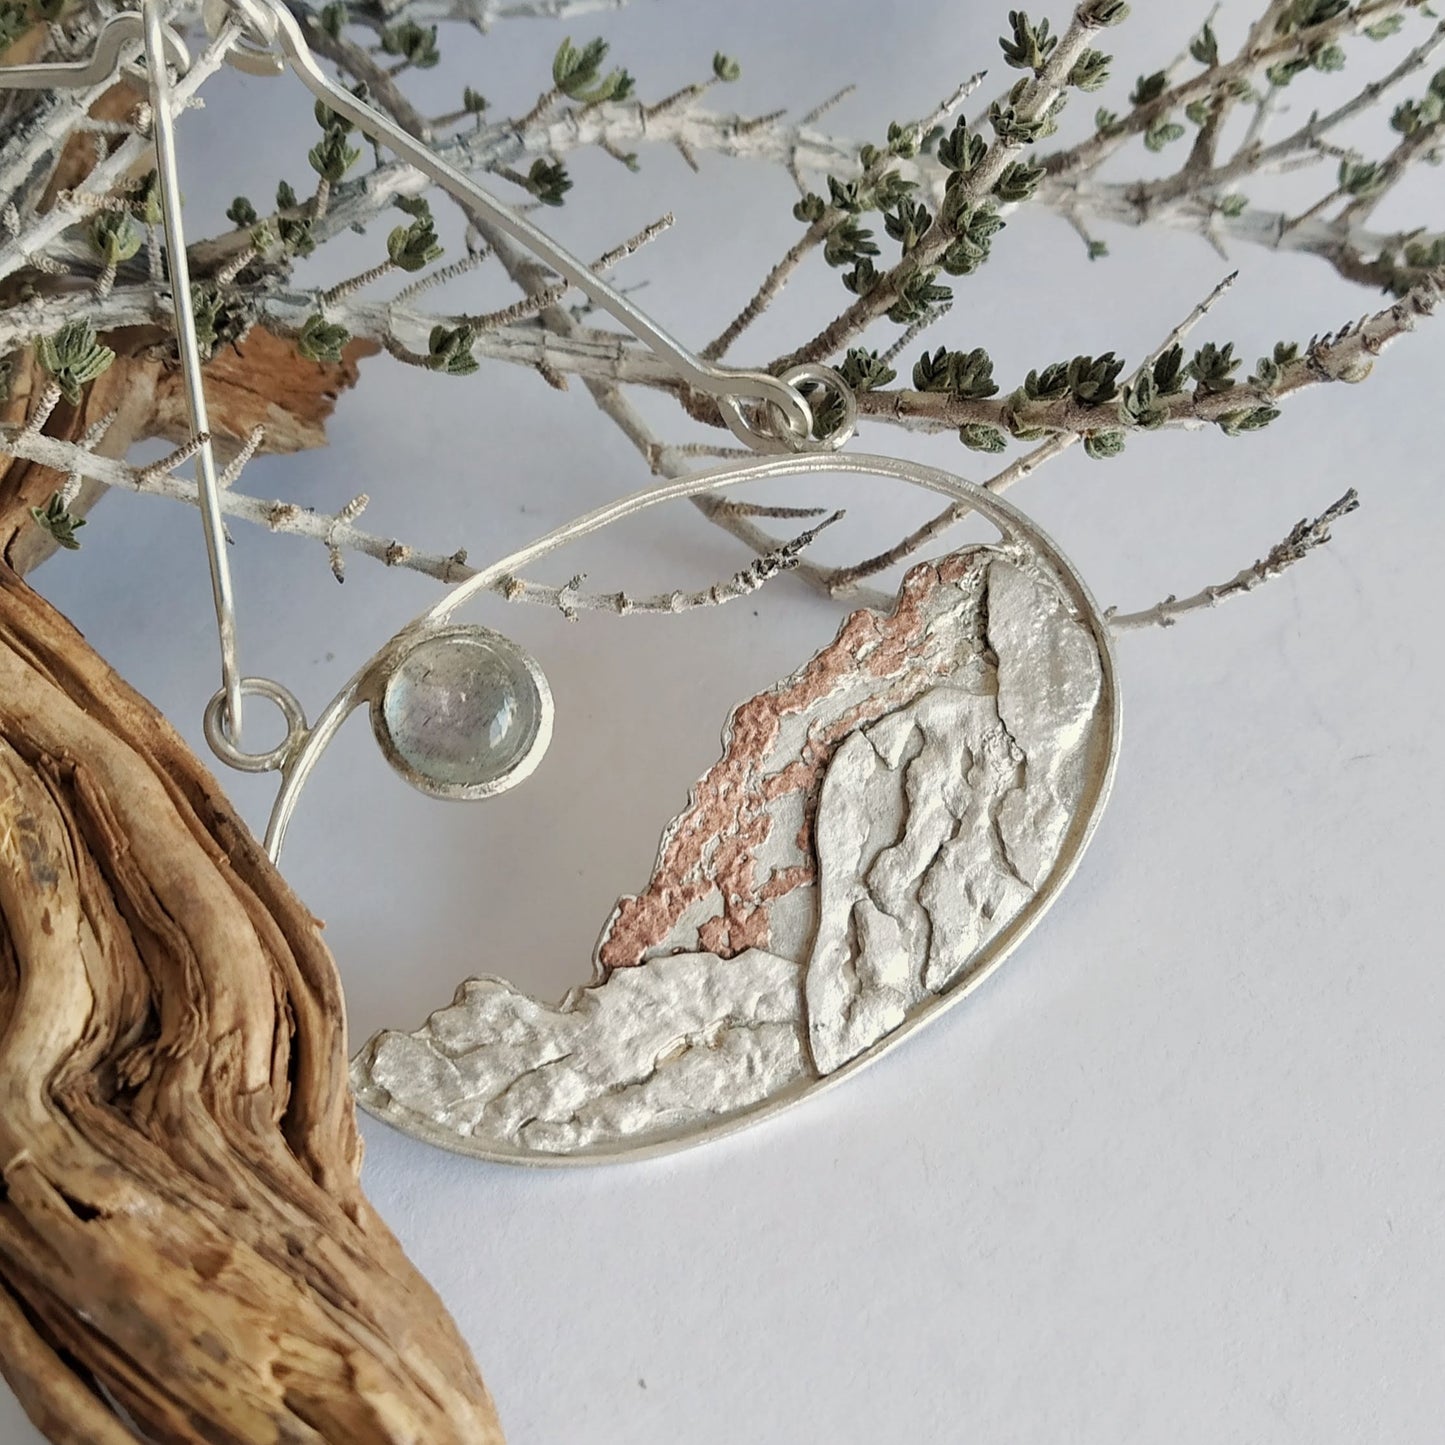 A silver pendant with a labradorite (moonstone) and a copper representing a landscape under the moon